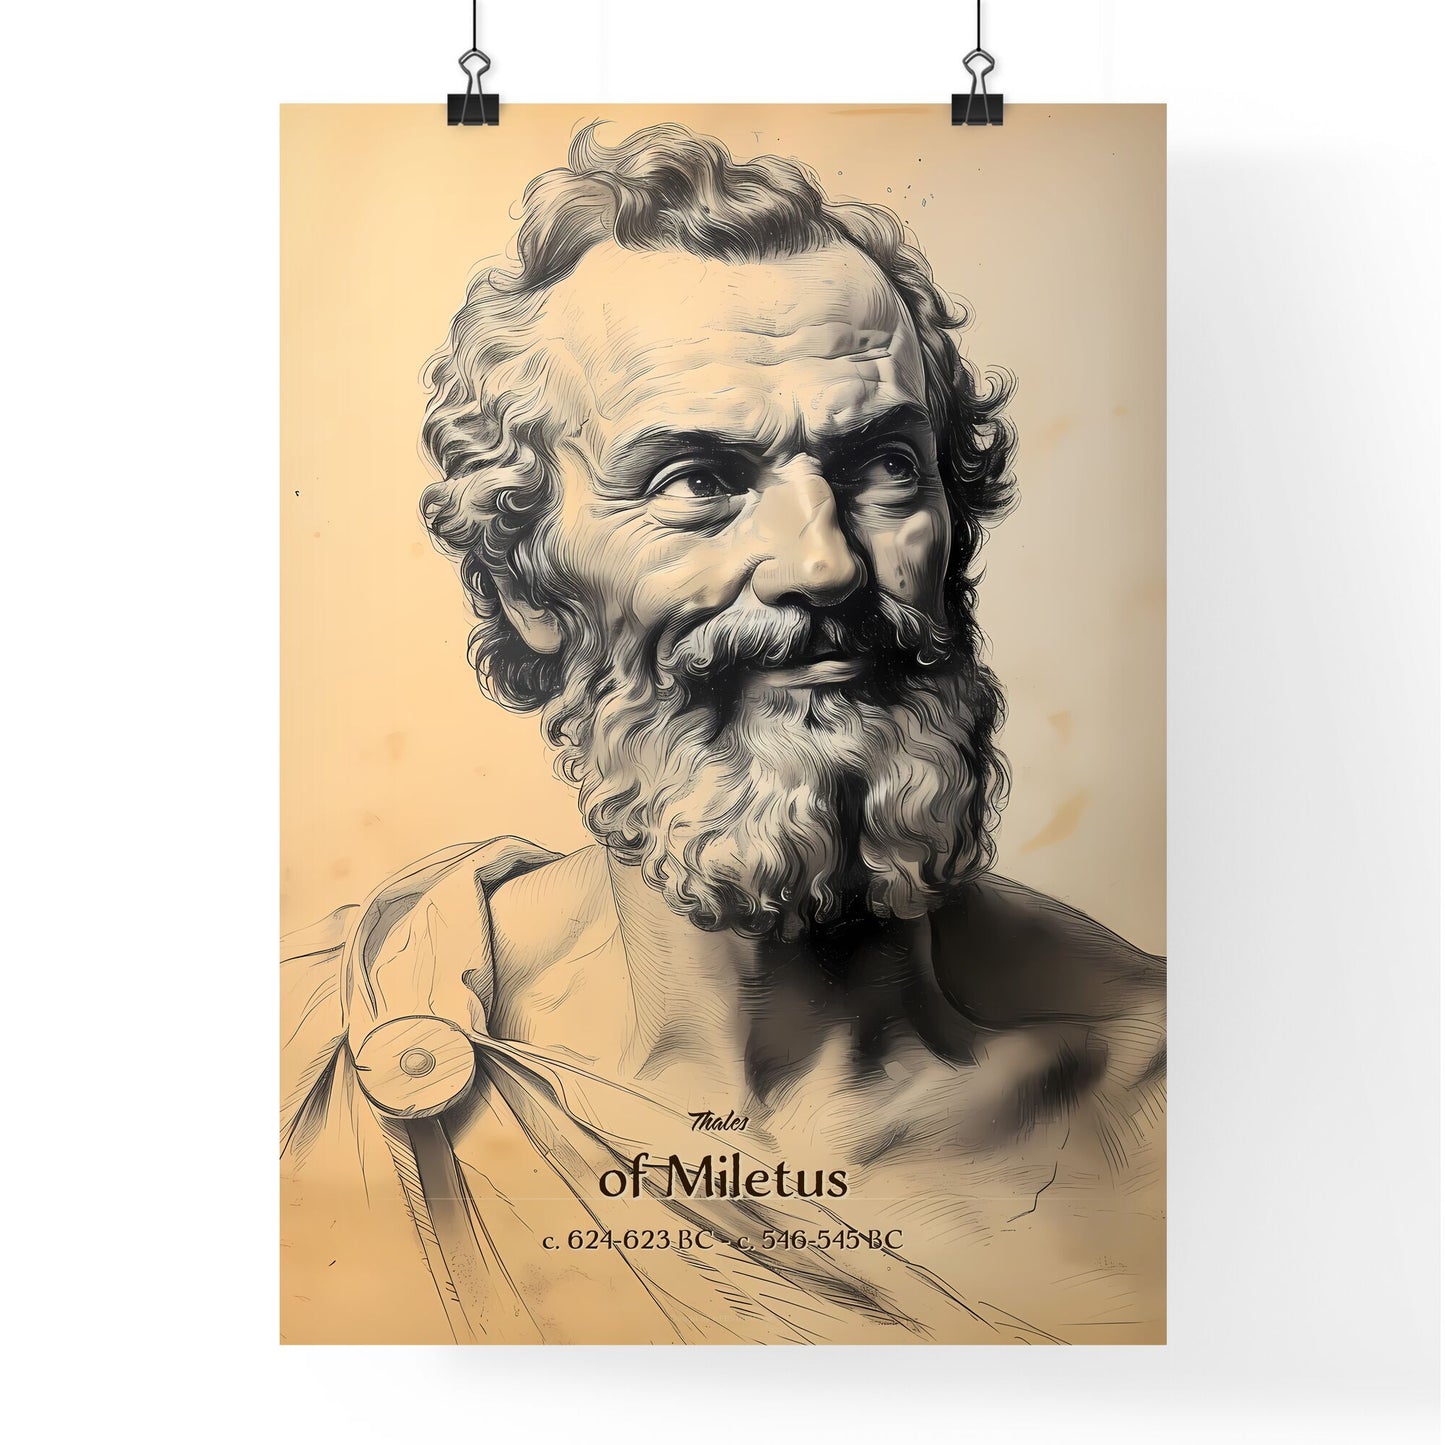 Thales, of Miletus, c. 624-623 BC - c. 546-545 BC, A Poster of a drawing of a bearded man Default Title